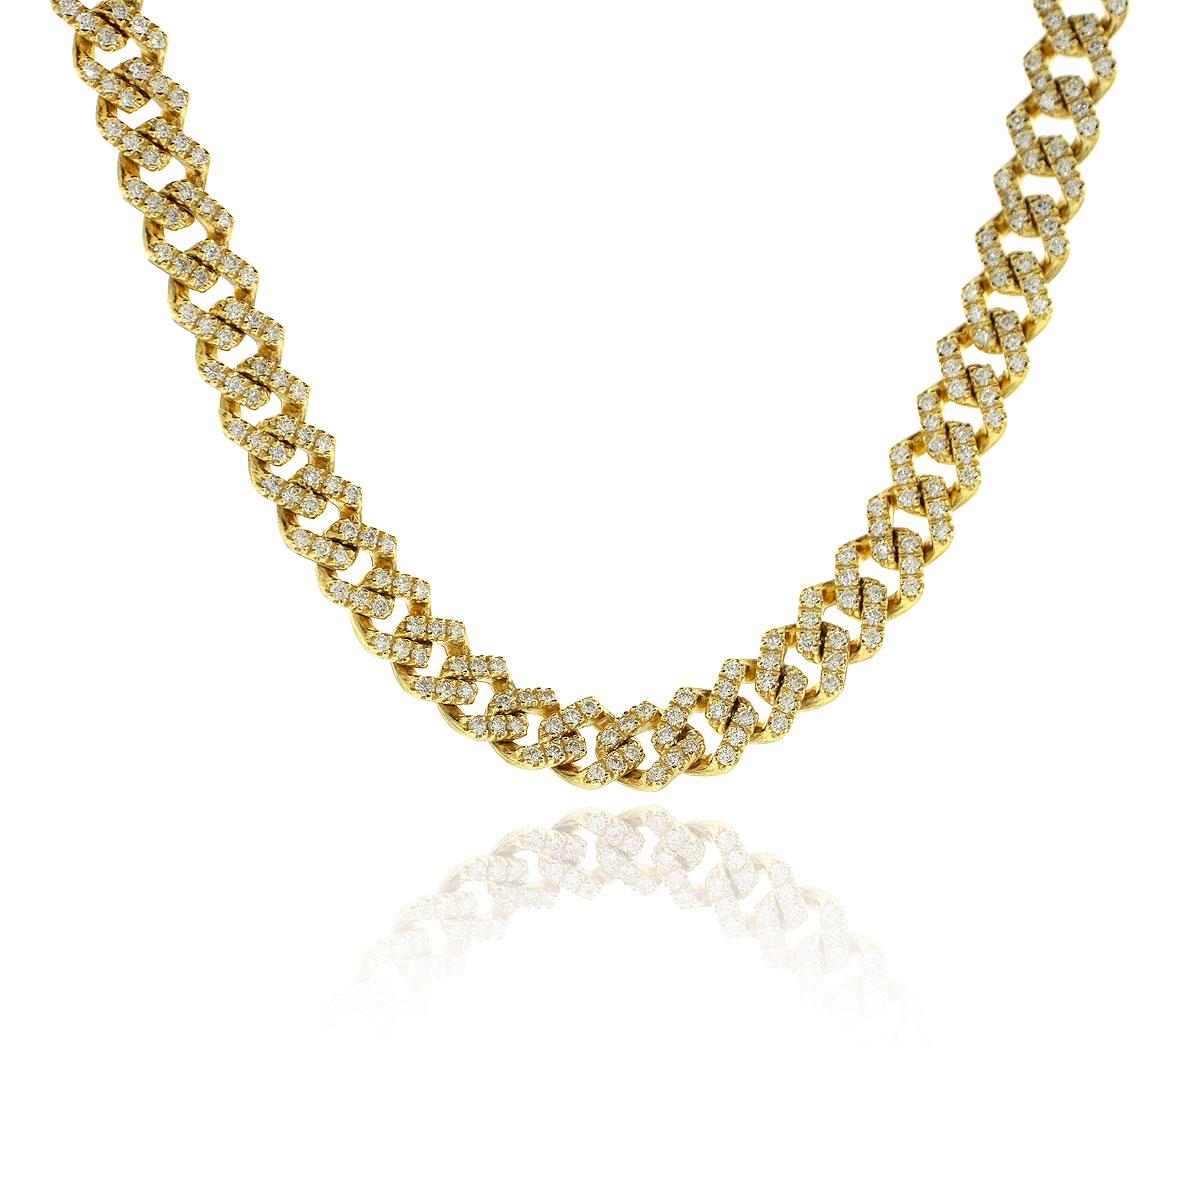 Style: 14k Yellow Gold 13.74ctw Diamond Pave Cuban Link Chain Necklace
Material: 14k Yellow Gold
Stone Details: Approx. 13.74ctw of round cut diamonds. Diamonds are G/H in color and VS in clarity
Weight: 78.5g (50.5dwt)
Measurements: 19